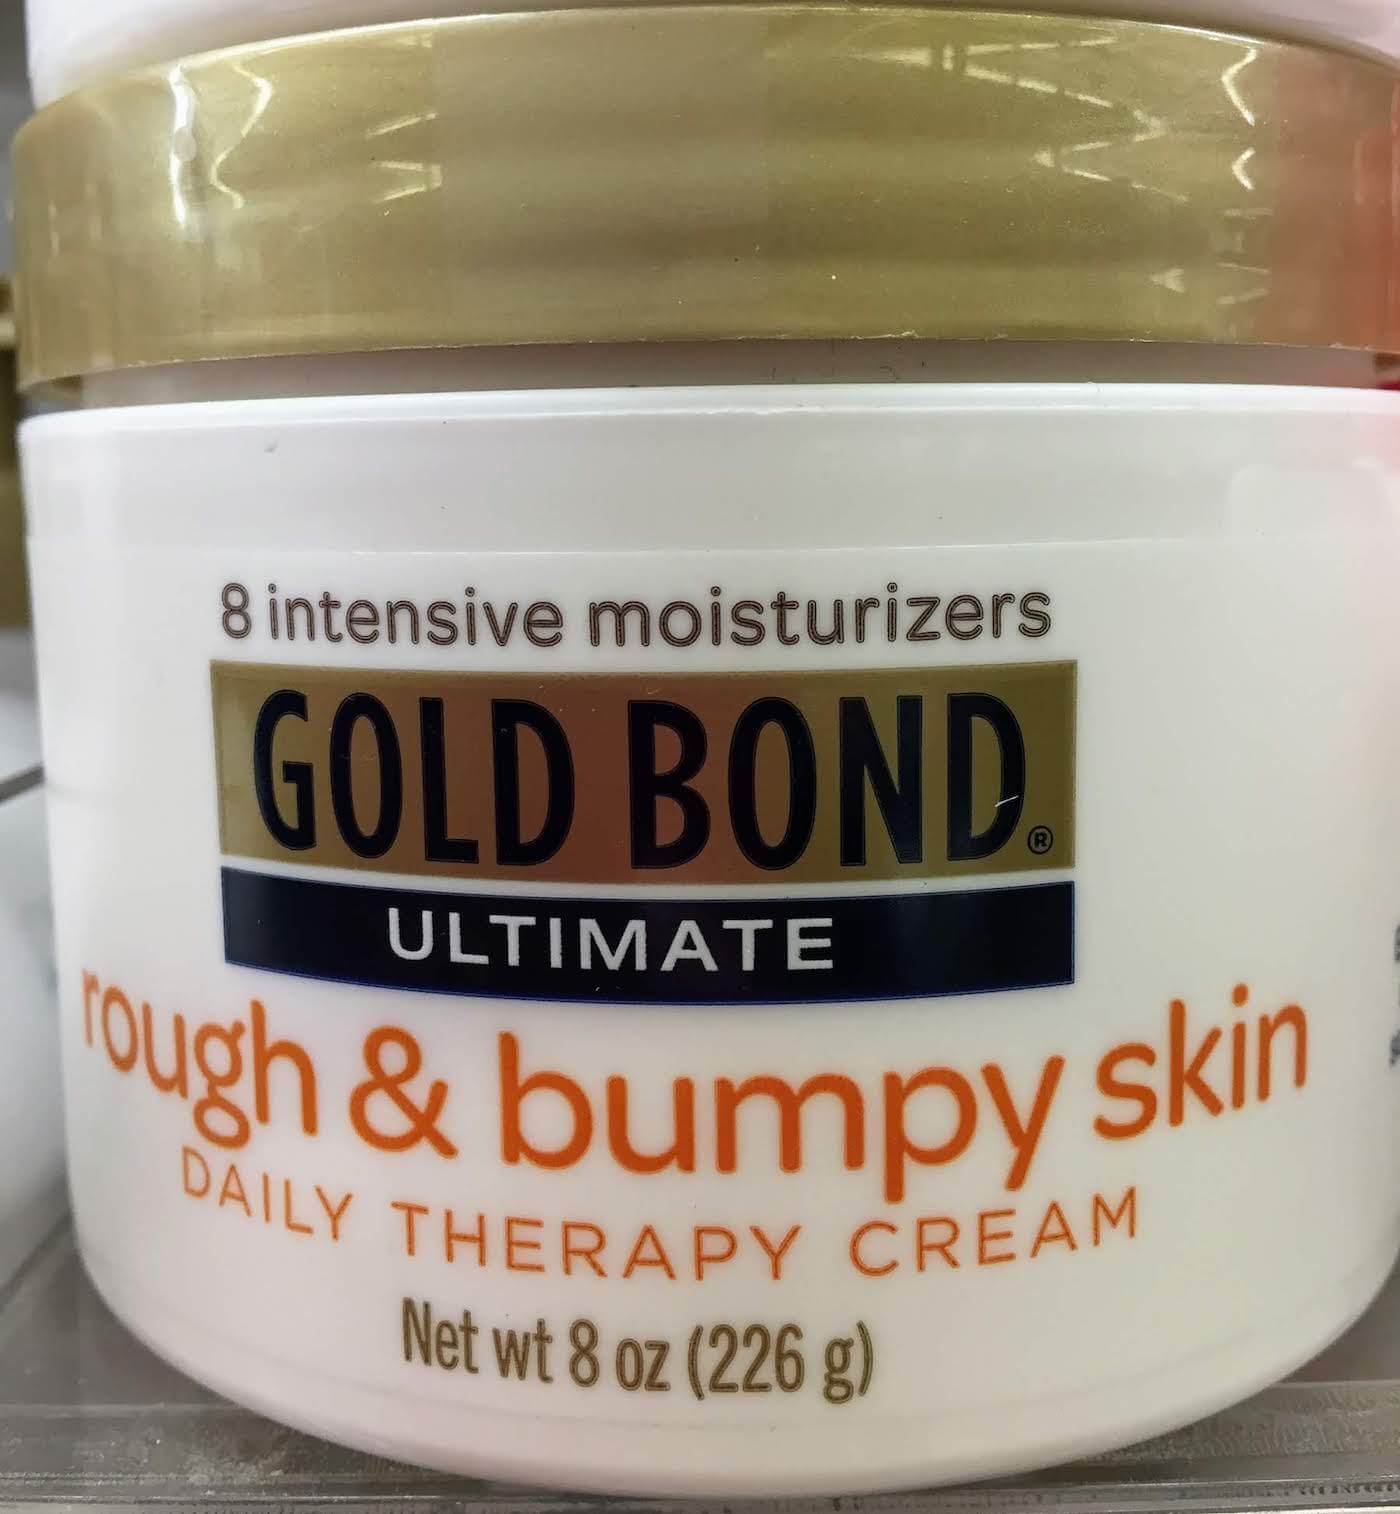 Gold Bond vs Cerave rough and bumpy skin products